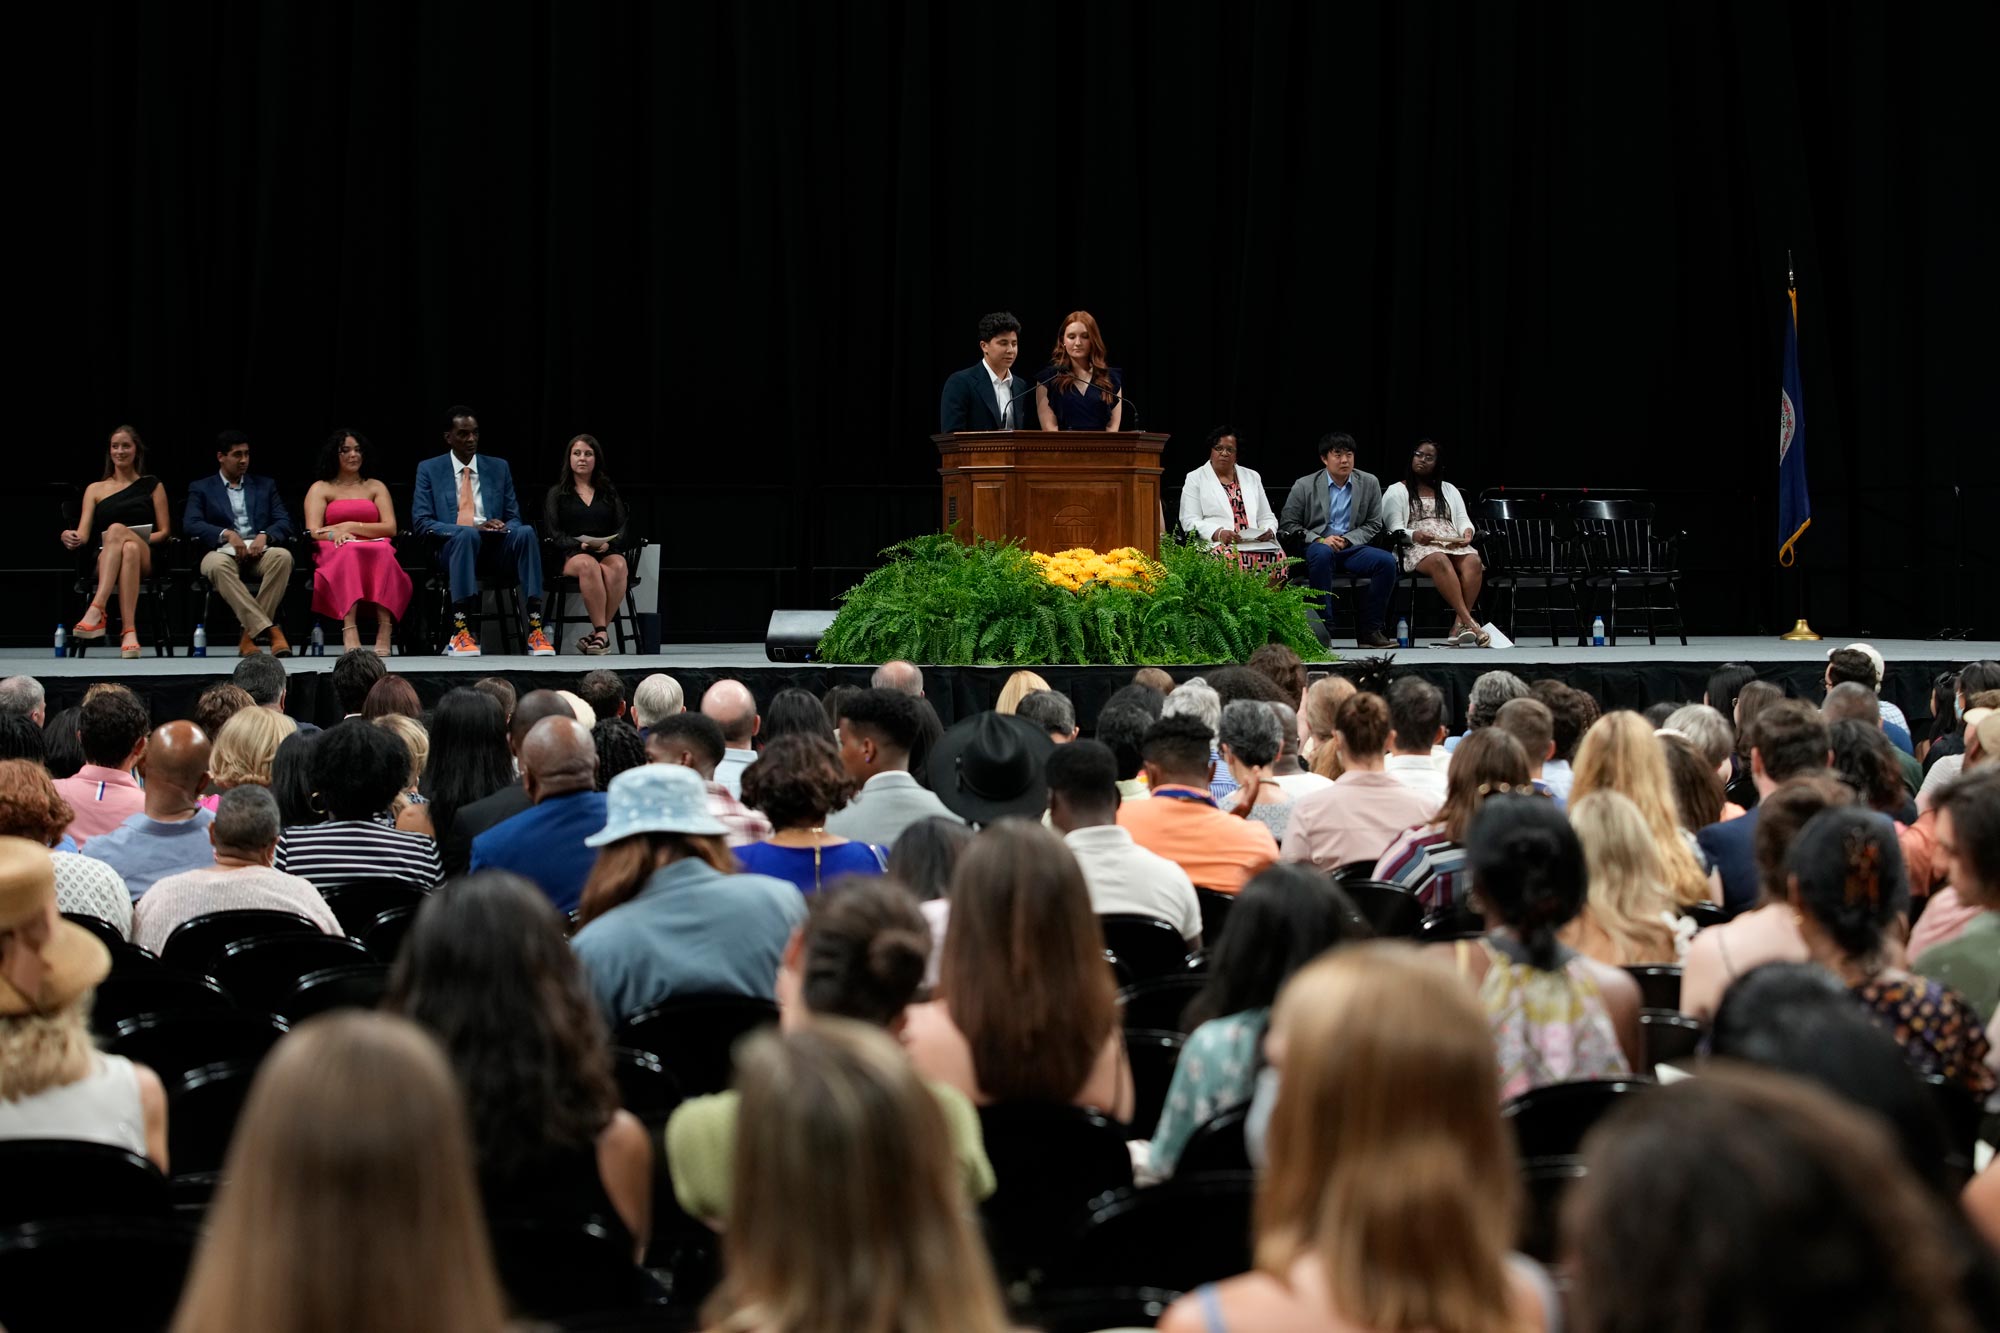 A seated crowd listens to two people speaking at a podium